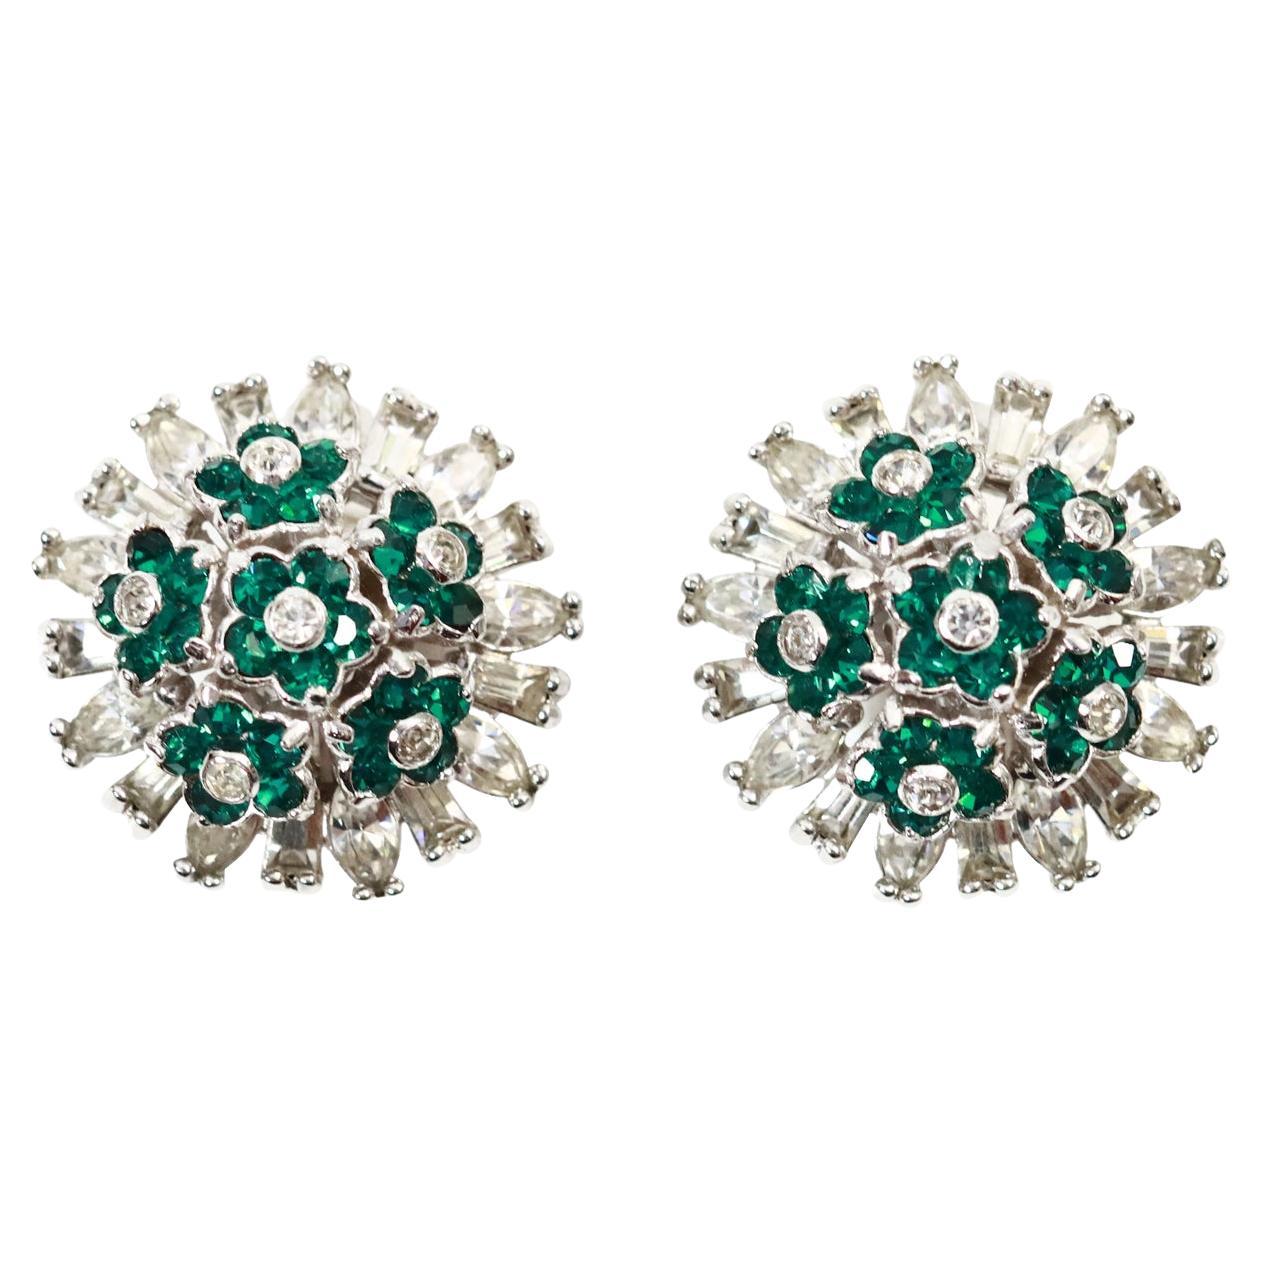 Vintage Pennino Emerald Green and Crystal Flower Earrings Circa 1960s For Sale